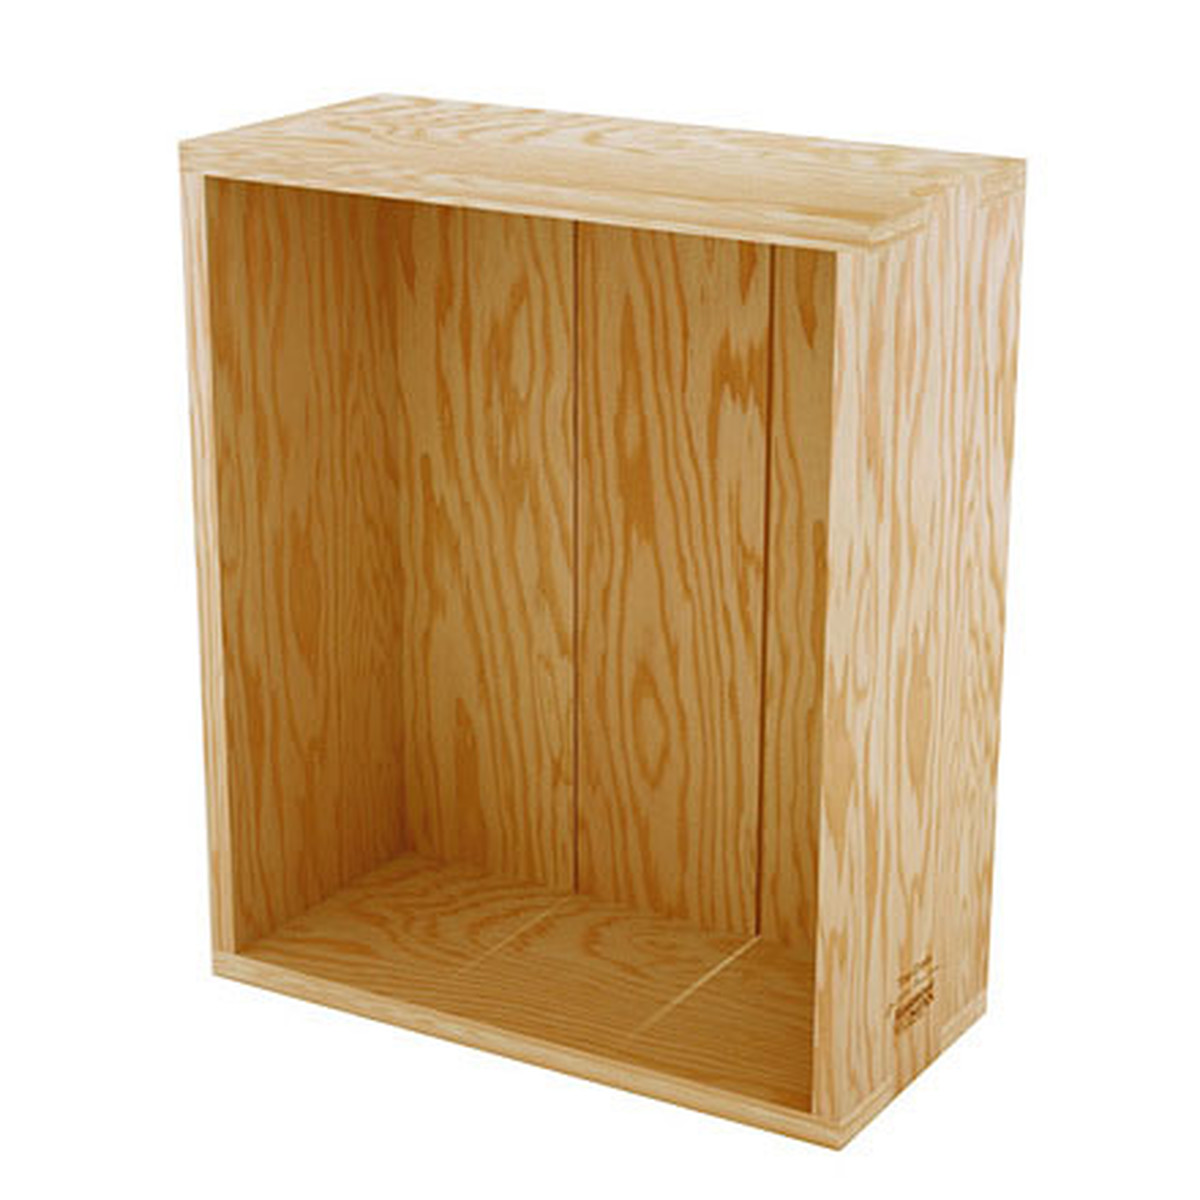 The Crate Side Table